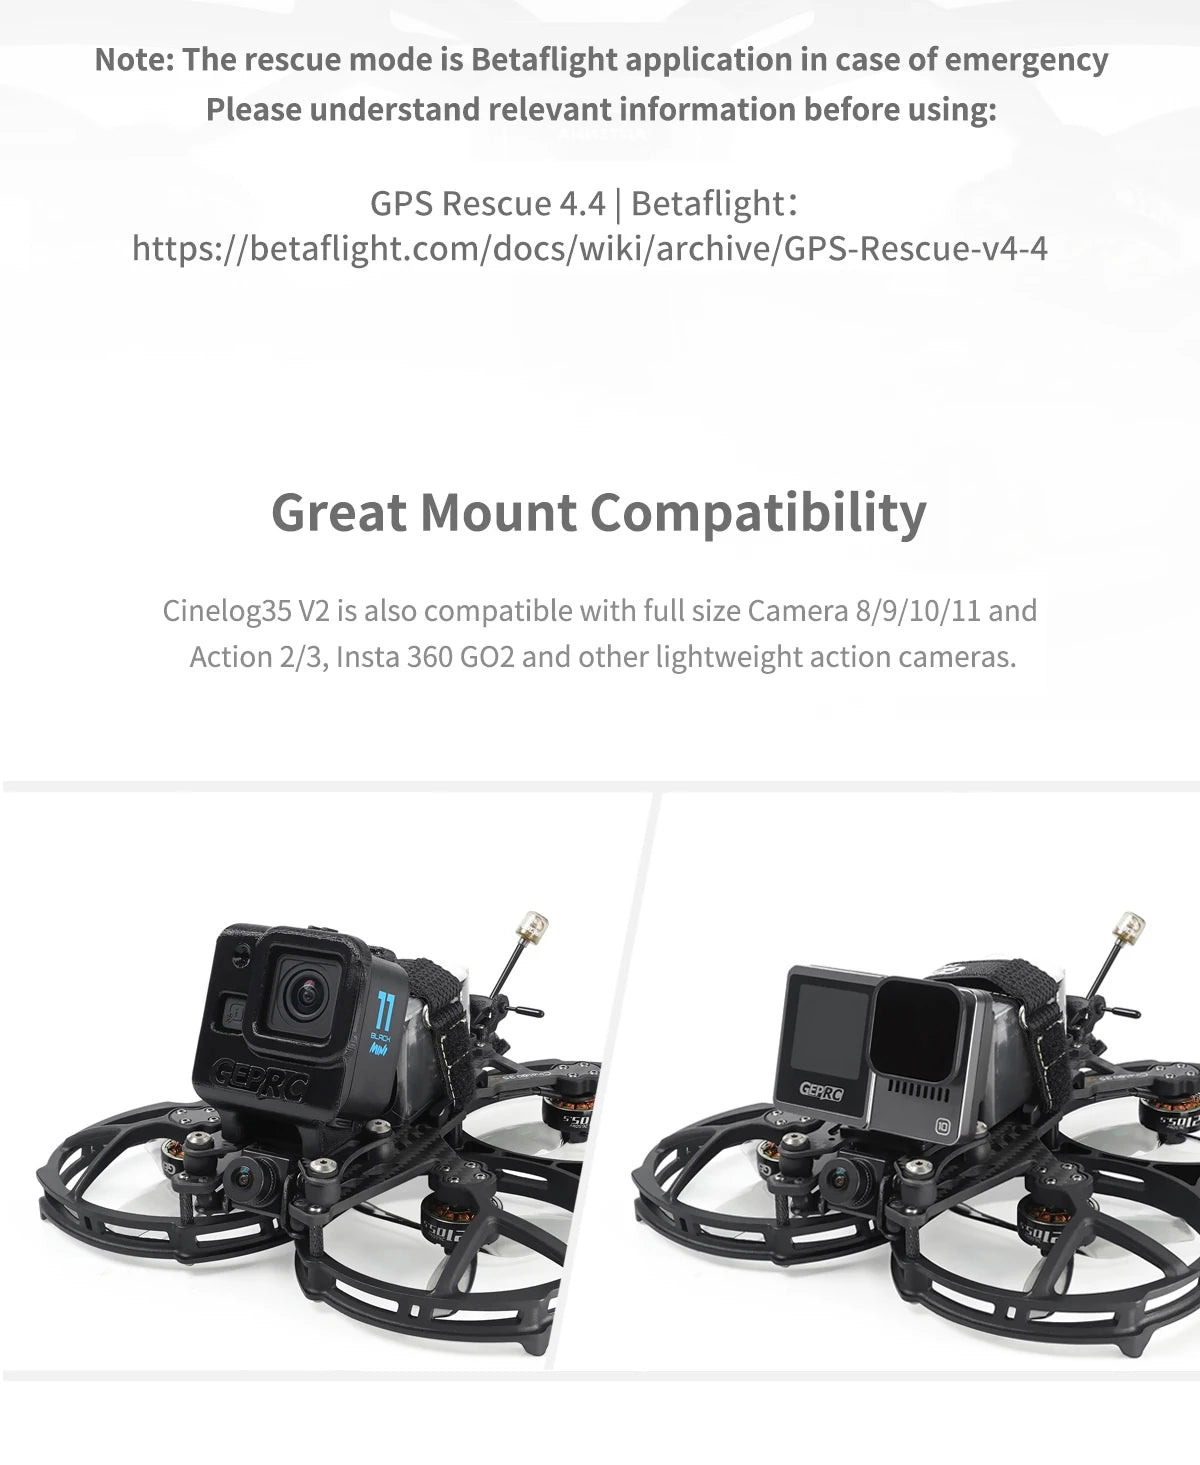 GEPRC Cinelog35 V2 Analog FPV Drone, the rescue mode is Betaflight application in case of emergency